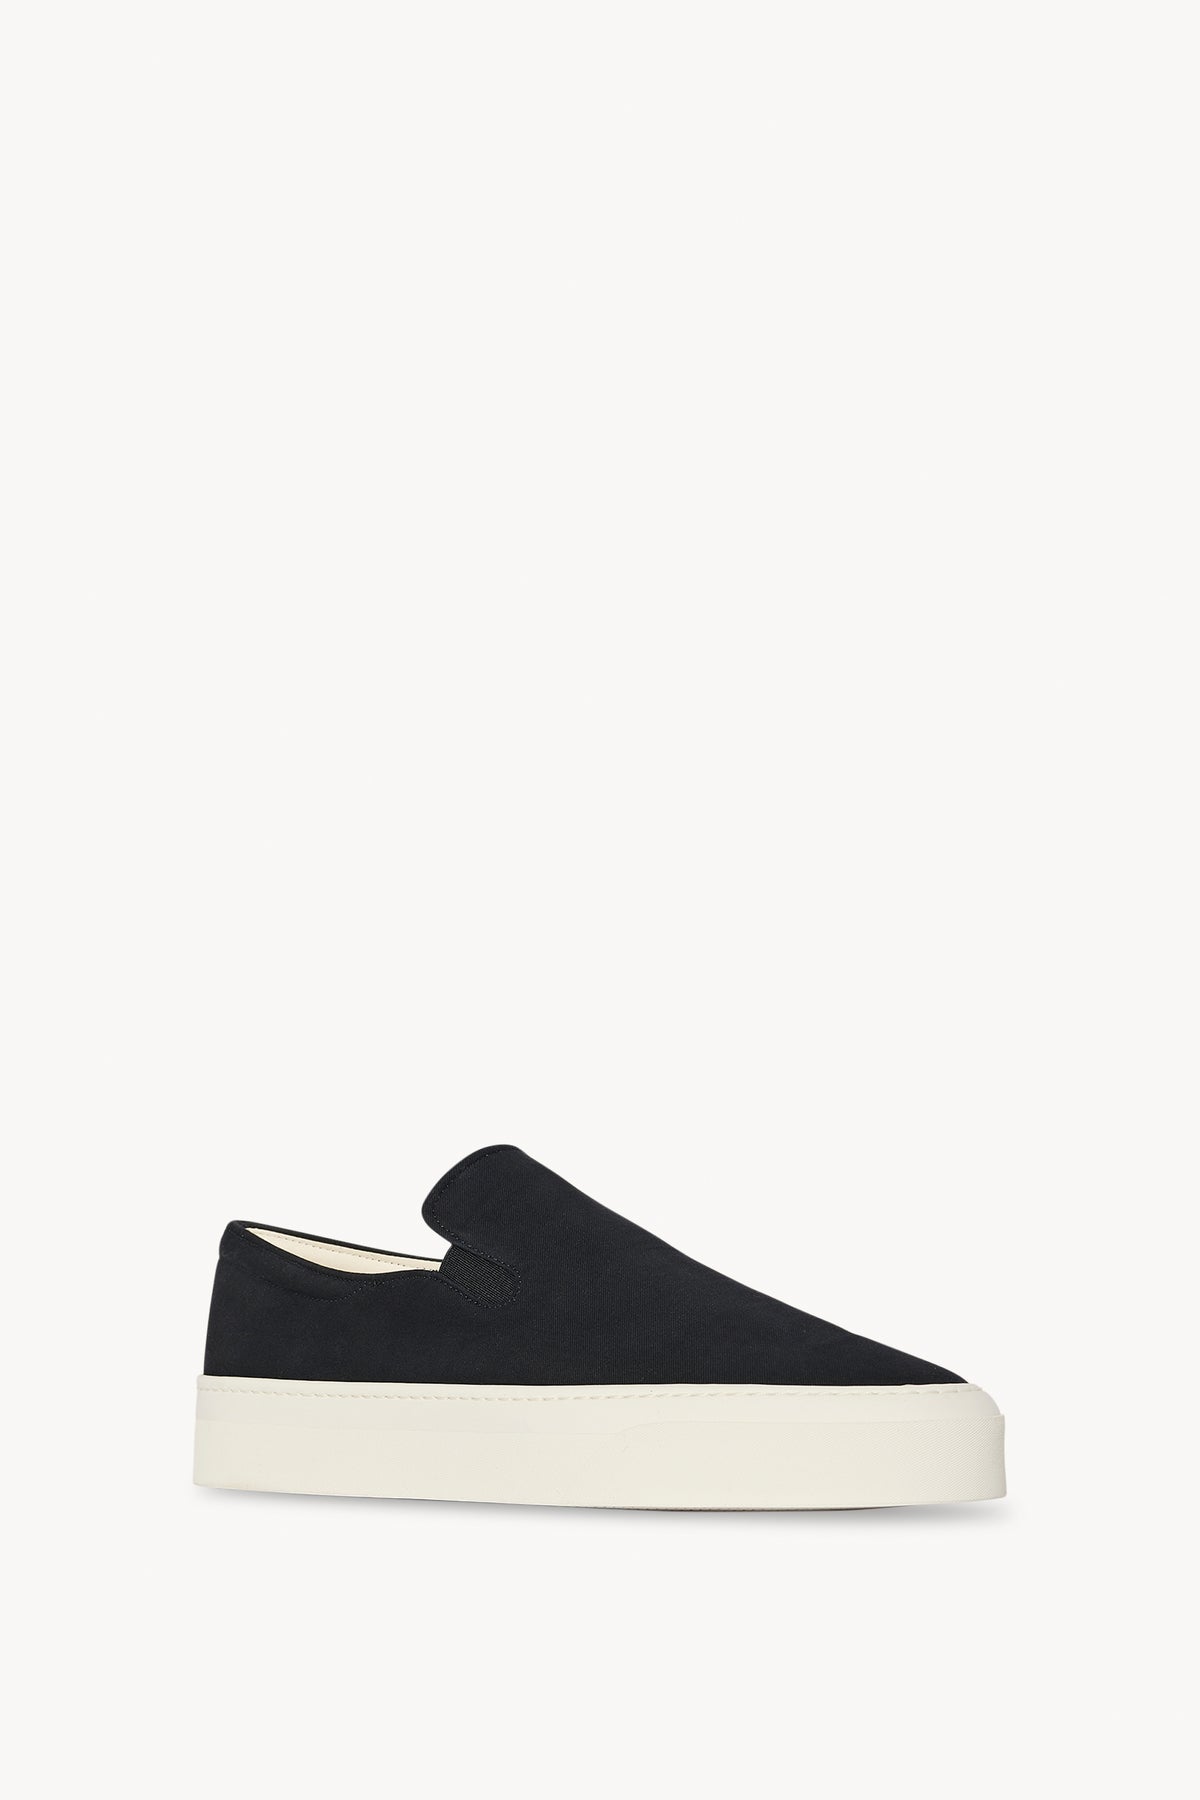 Marie H Sneakers in cotone 